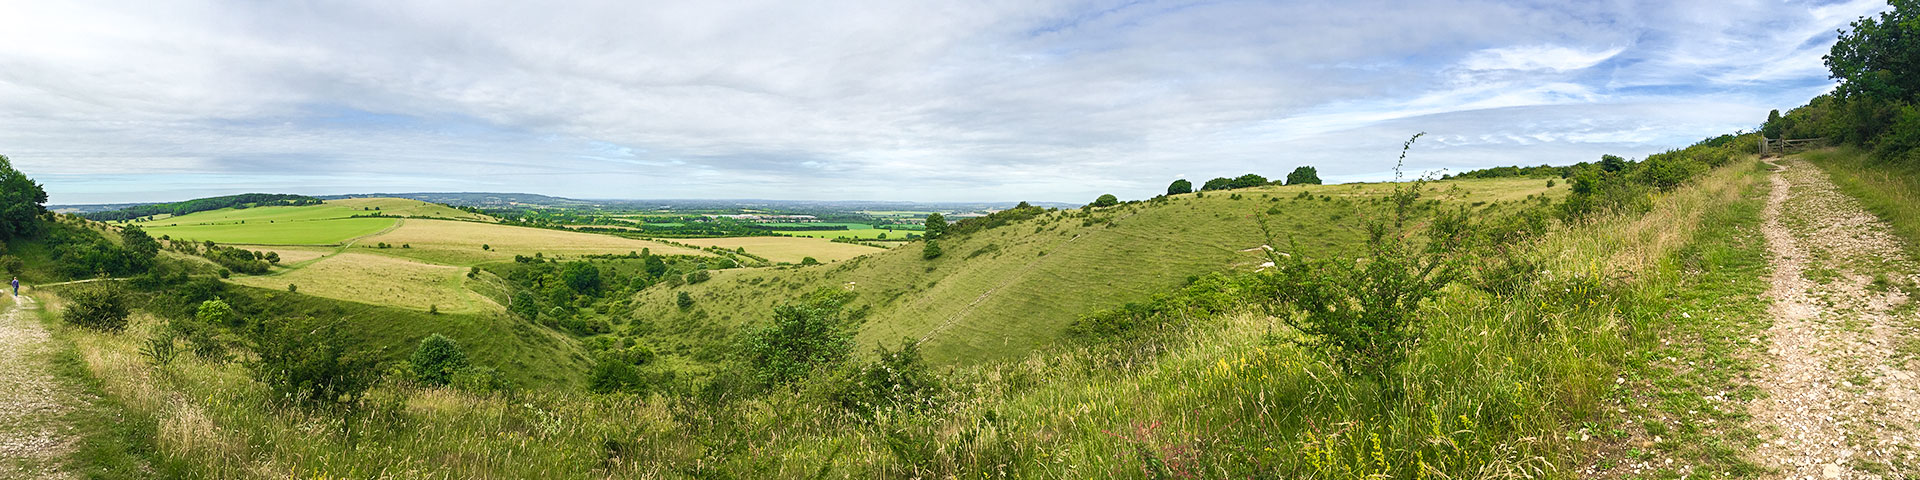 Hiking in Chiltern Hills, England